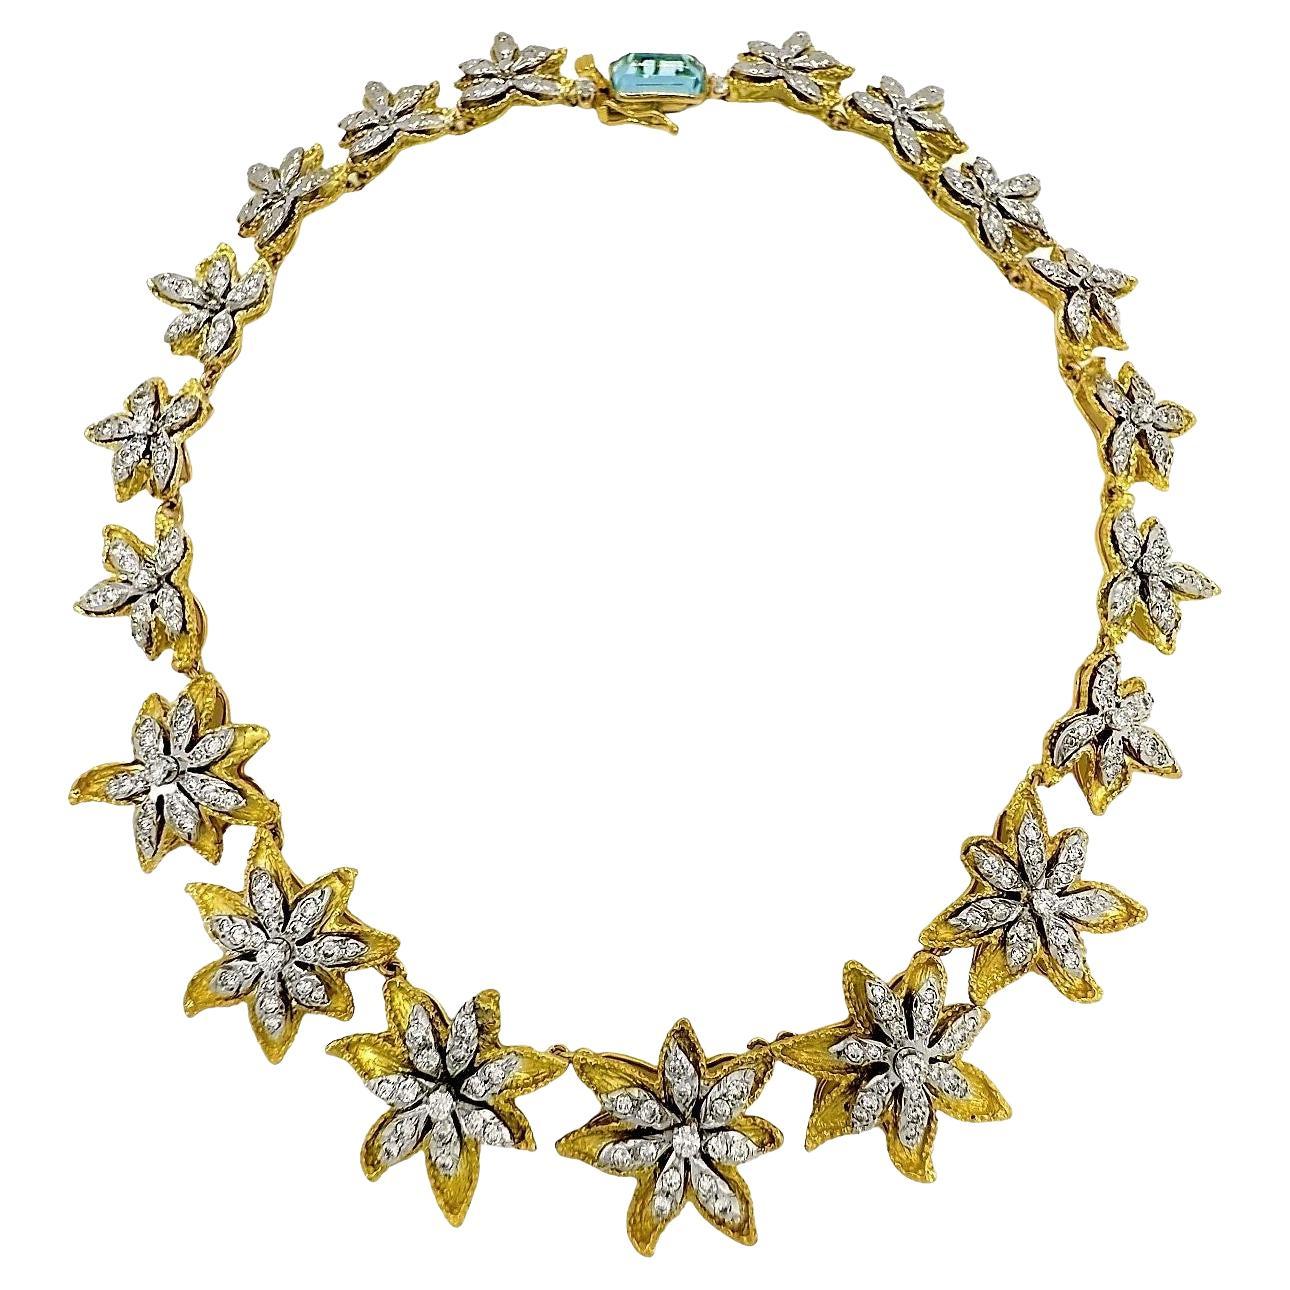 Vintage 18k Yellow Gold Floral Motif Necklace with Diamonds